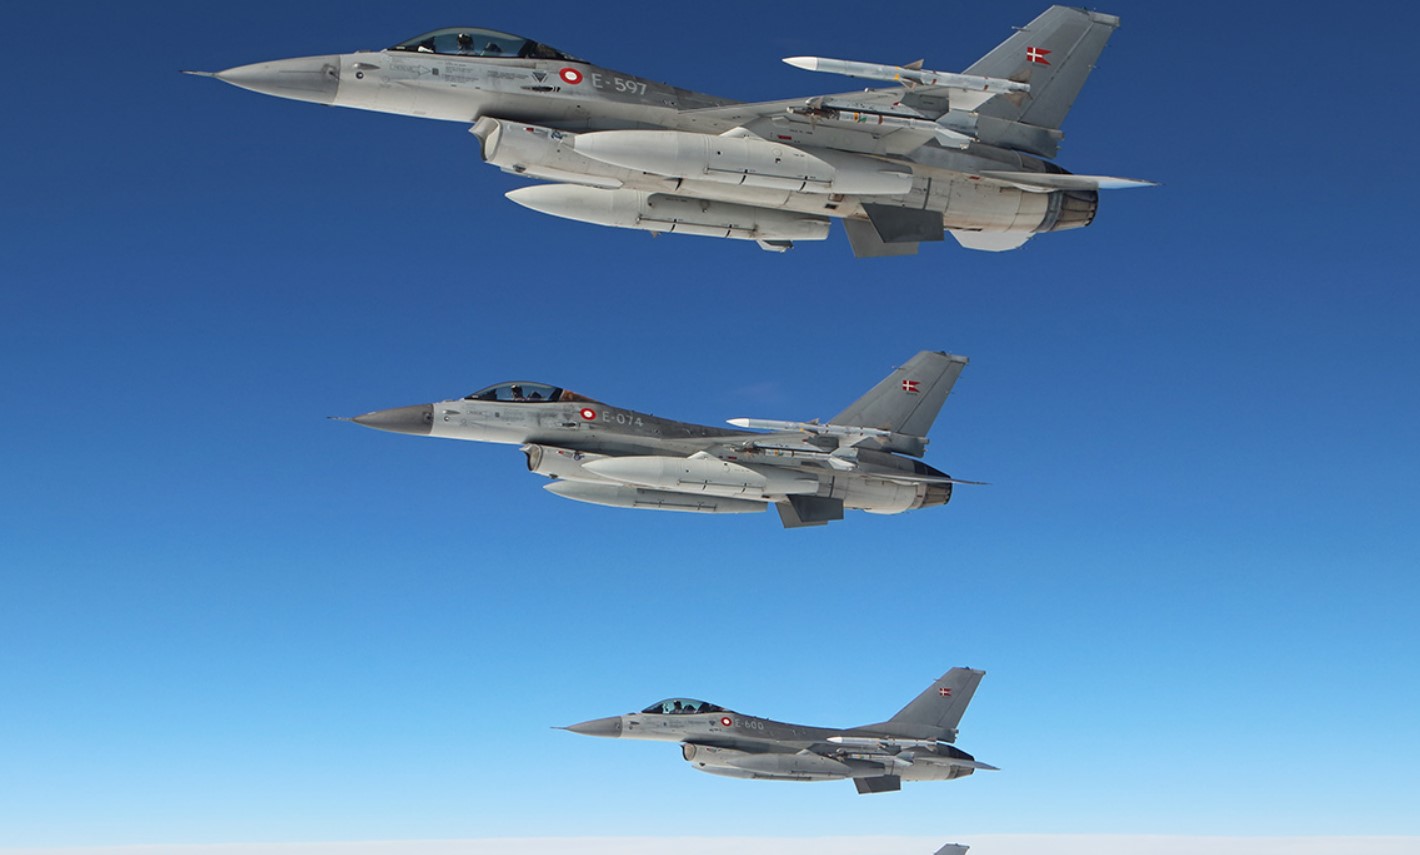 Denmark will study possibility of transferring F-16 fighter jets to Ukraine